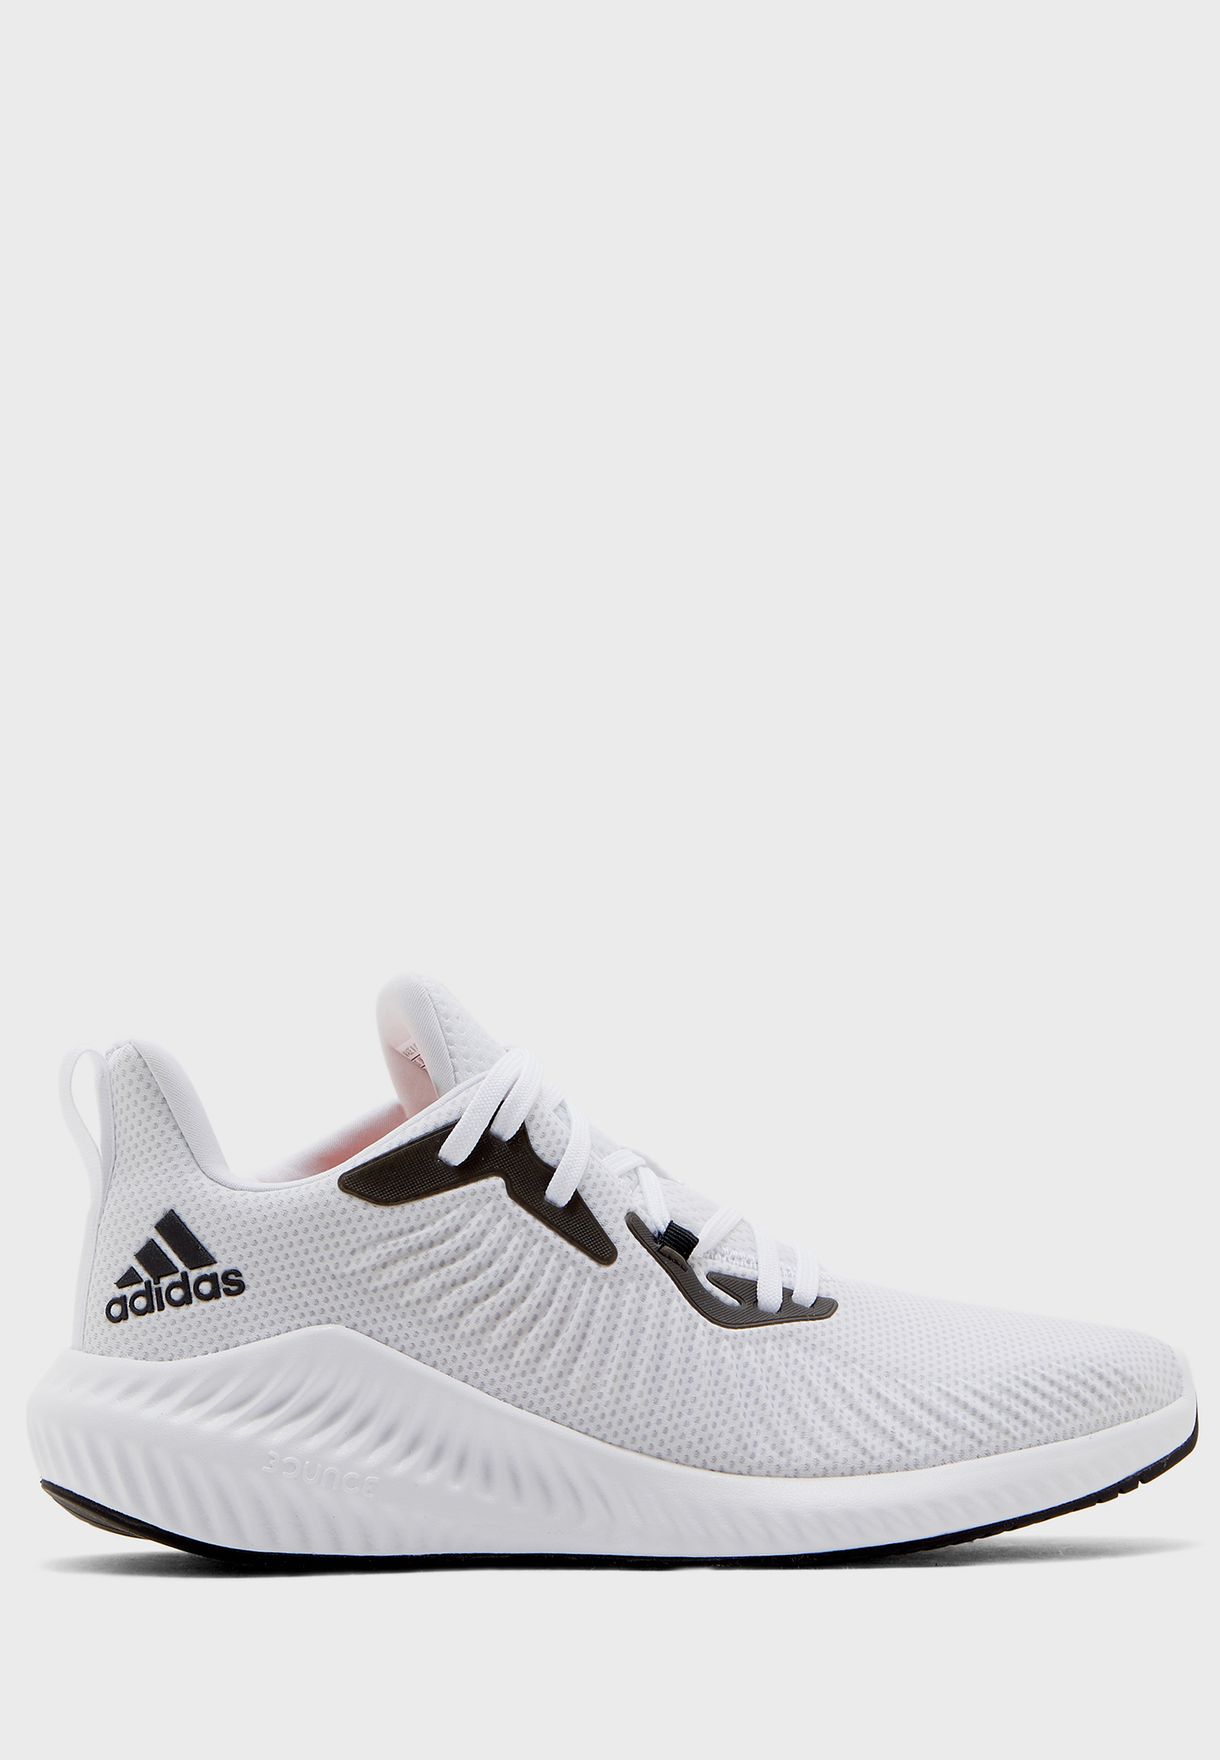 Adidas Alphabounce 3 Mens Top Sellers, UP TO 54% OFF